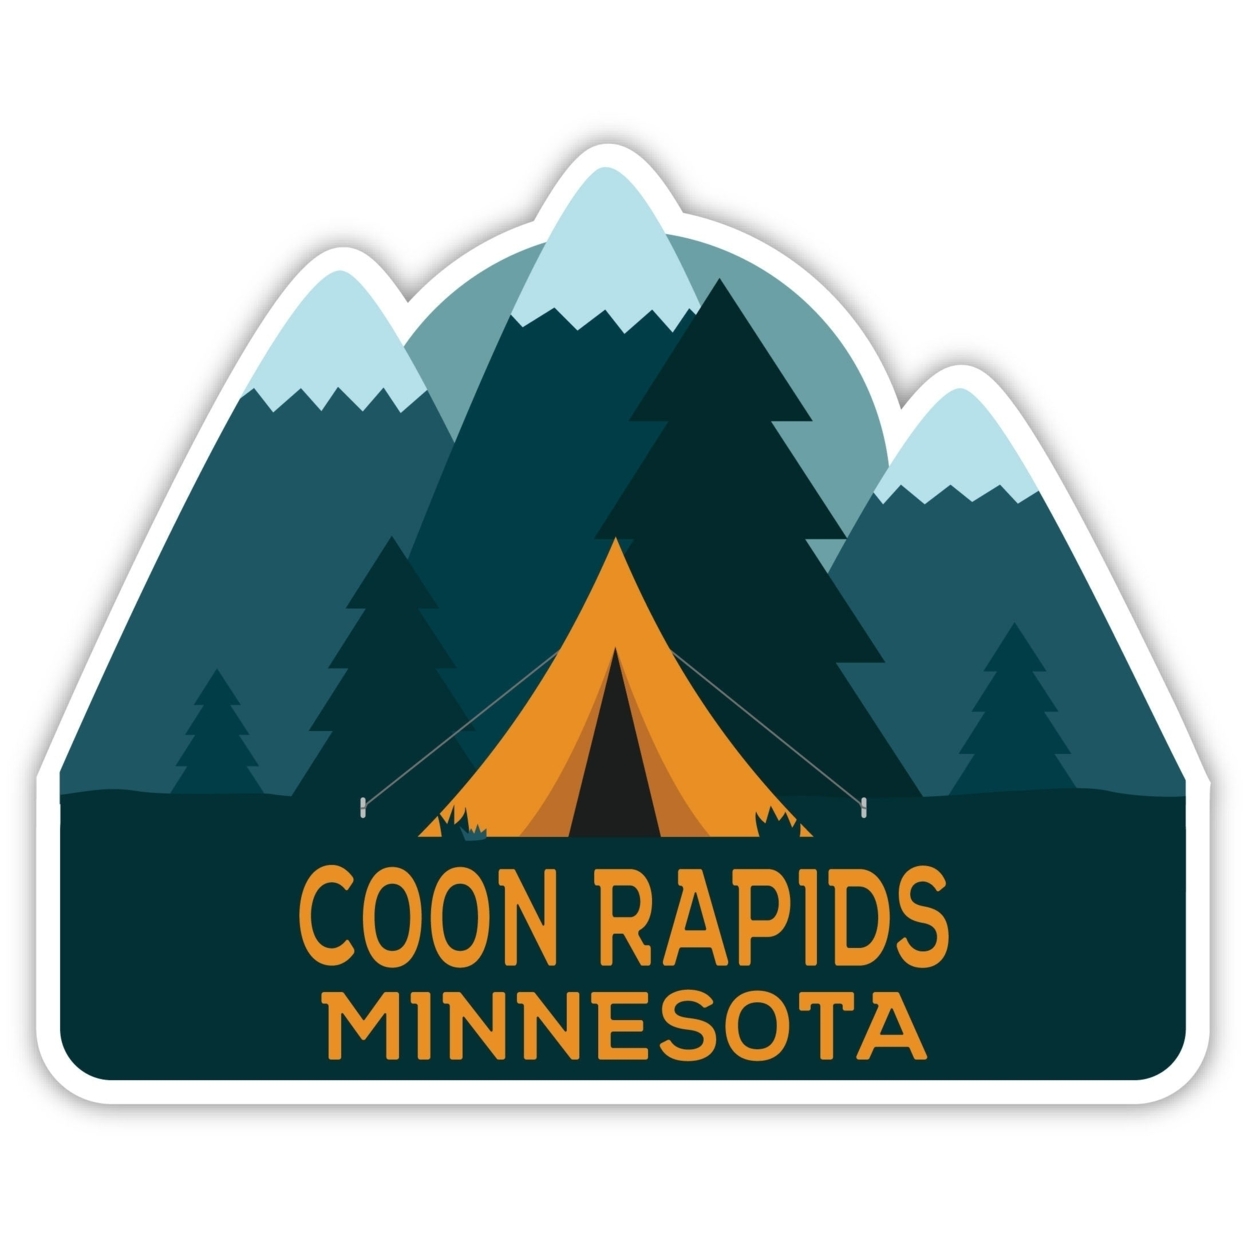 Coon Rapids Minnesota Souvenir Decorative Stickers (Choose Theme And Size) - 4-Pack, 2-Inch, Tent